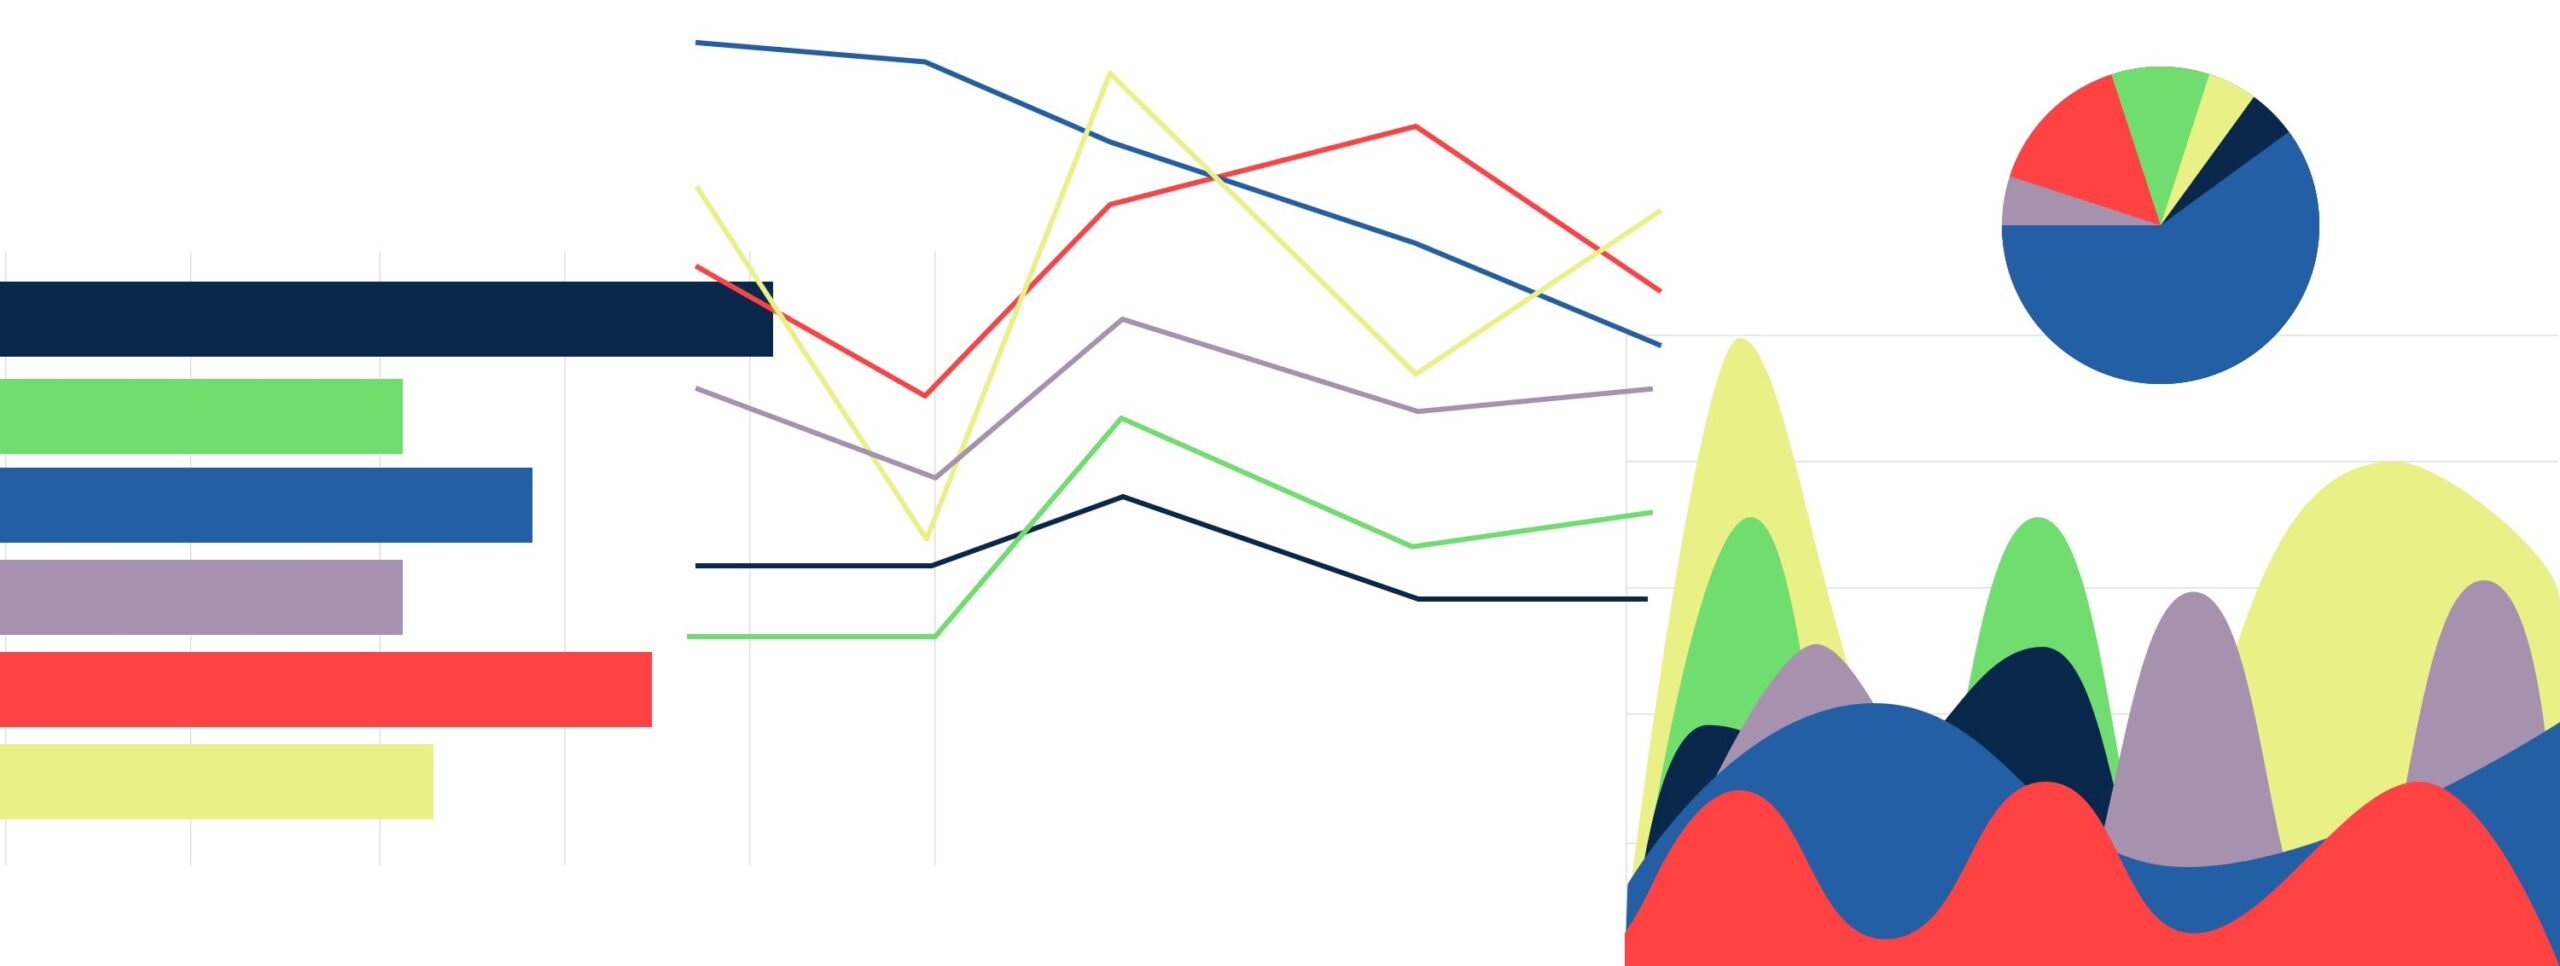 A variety of data visualizations with bright colors